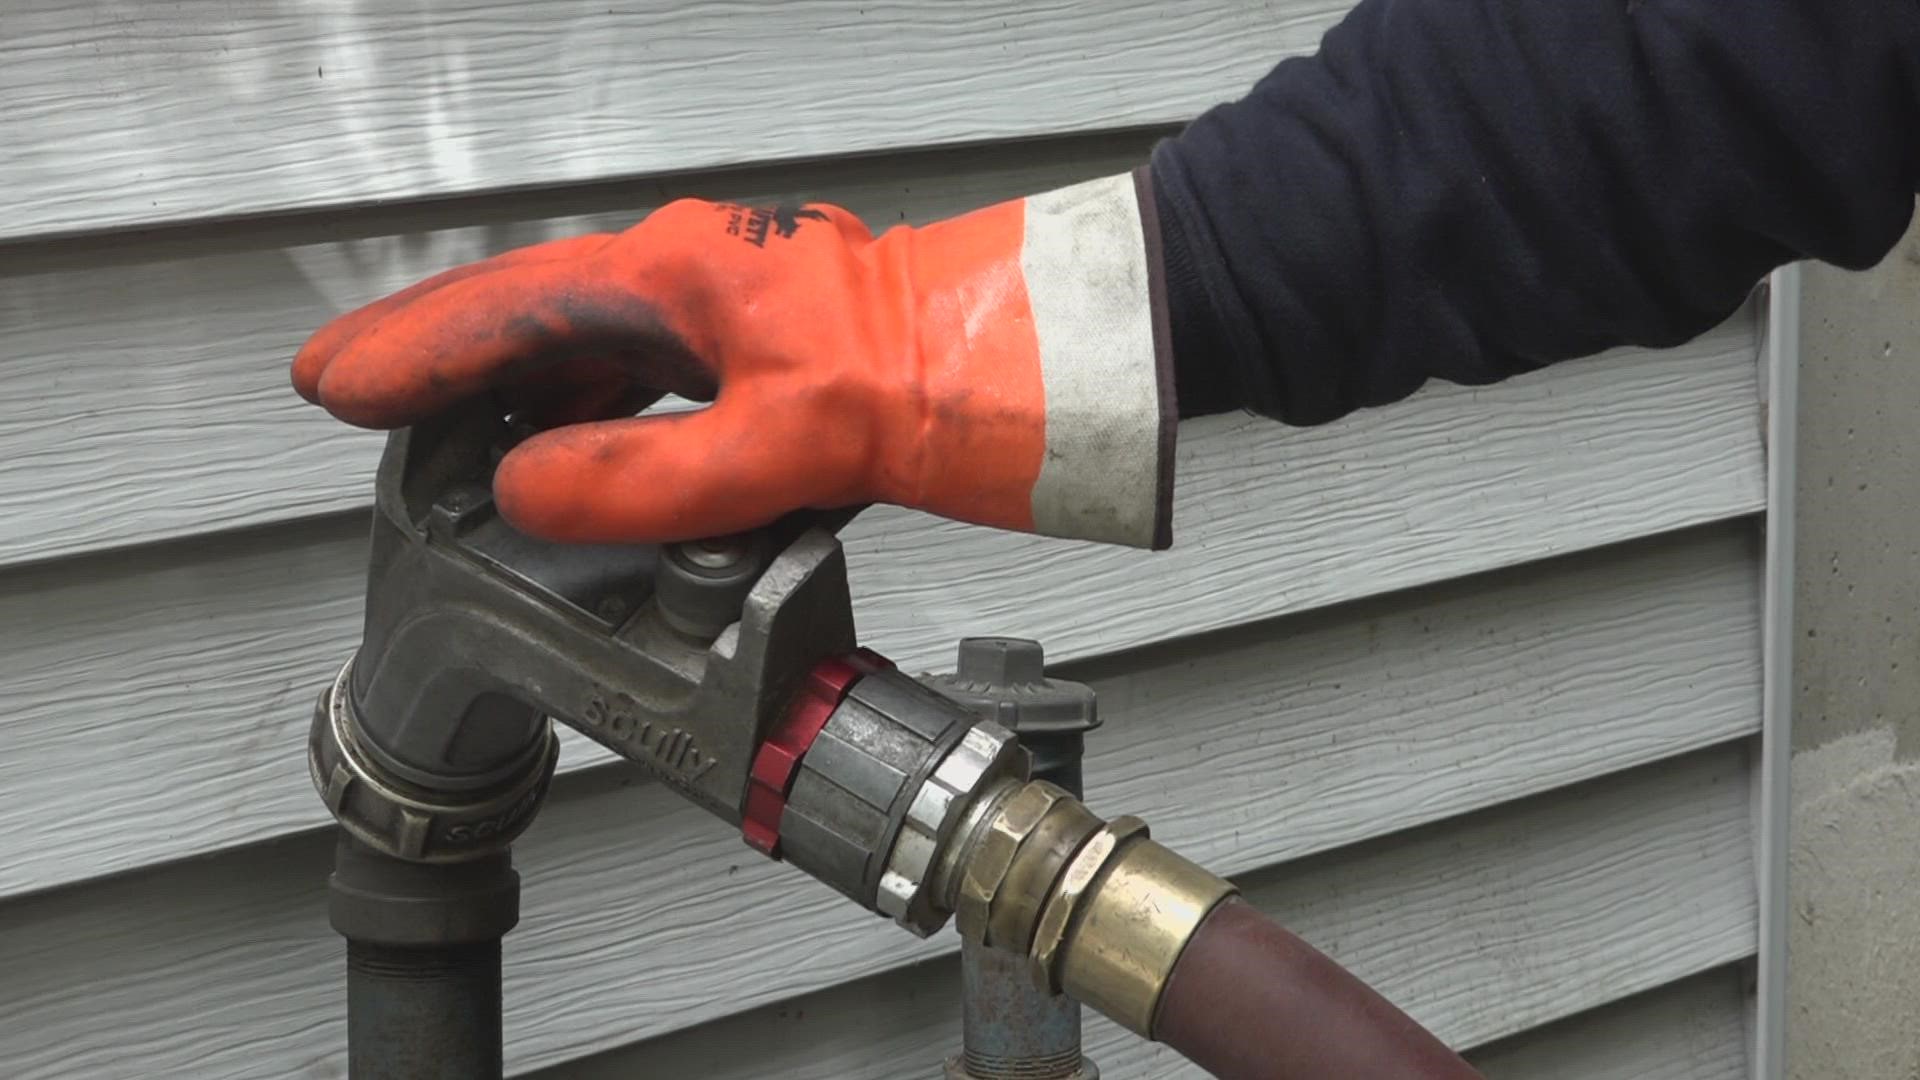 The statewide average price for heating oil has increased 72% over the past year.